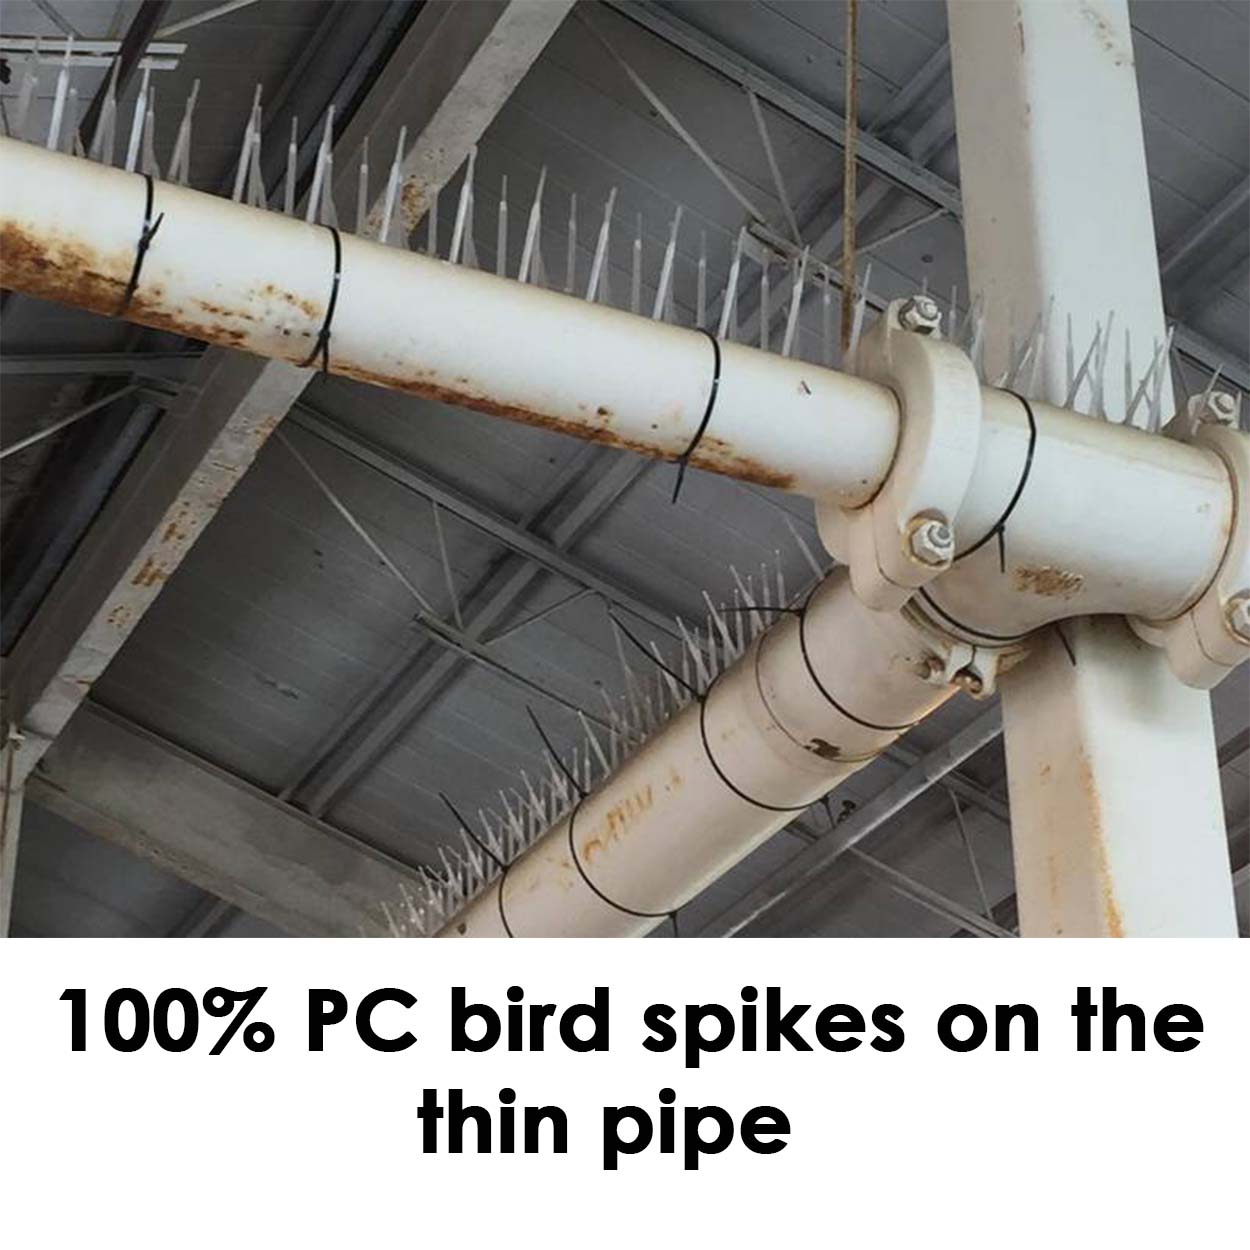 100% PC bird spikes on the thin pipe